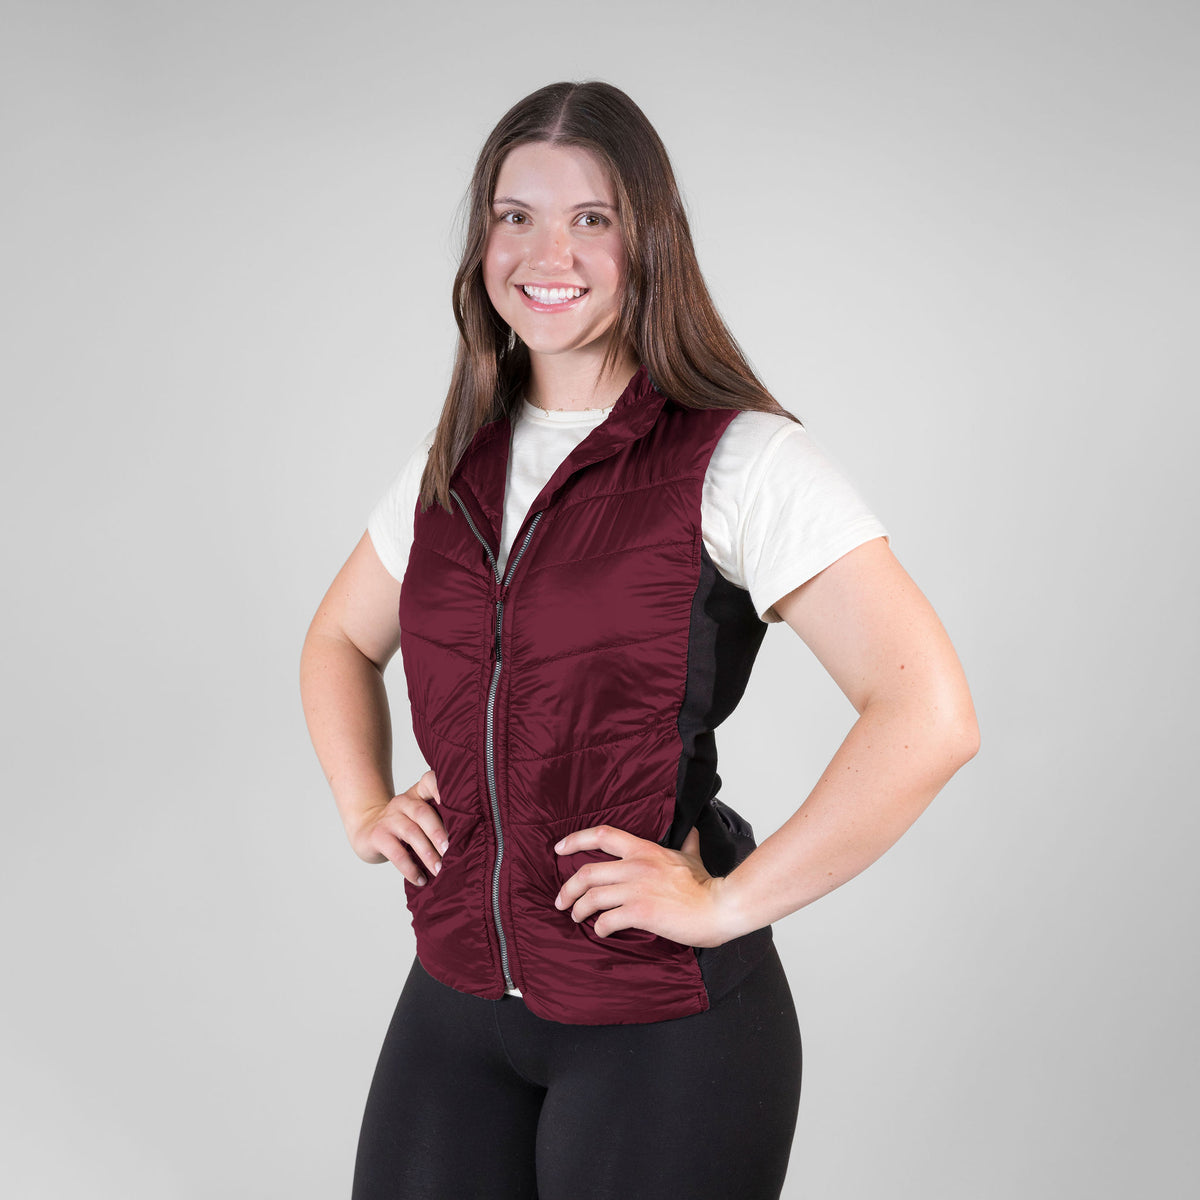 A smiling woman with brown hair standing with hands on hips in front of a white background. She is wearing black leggings, an Alpacas of Montana natural white women&#39;s performance tee, and a black Alpacas of Montana lightweight athletic activewear outerwear breathable moisture wicking antimicrobial soft comfortable exercise alpaca women&#39;s stretch lite vest for running sports exercise work out hiking climbing camping biking